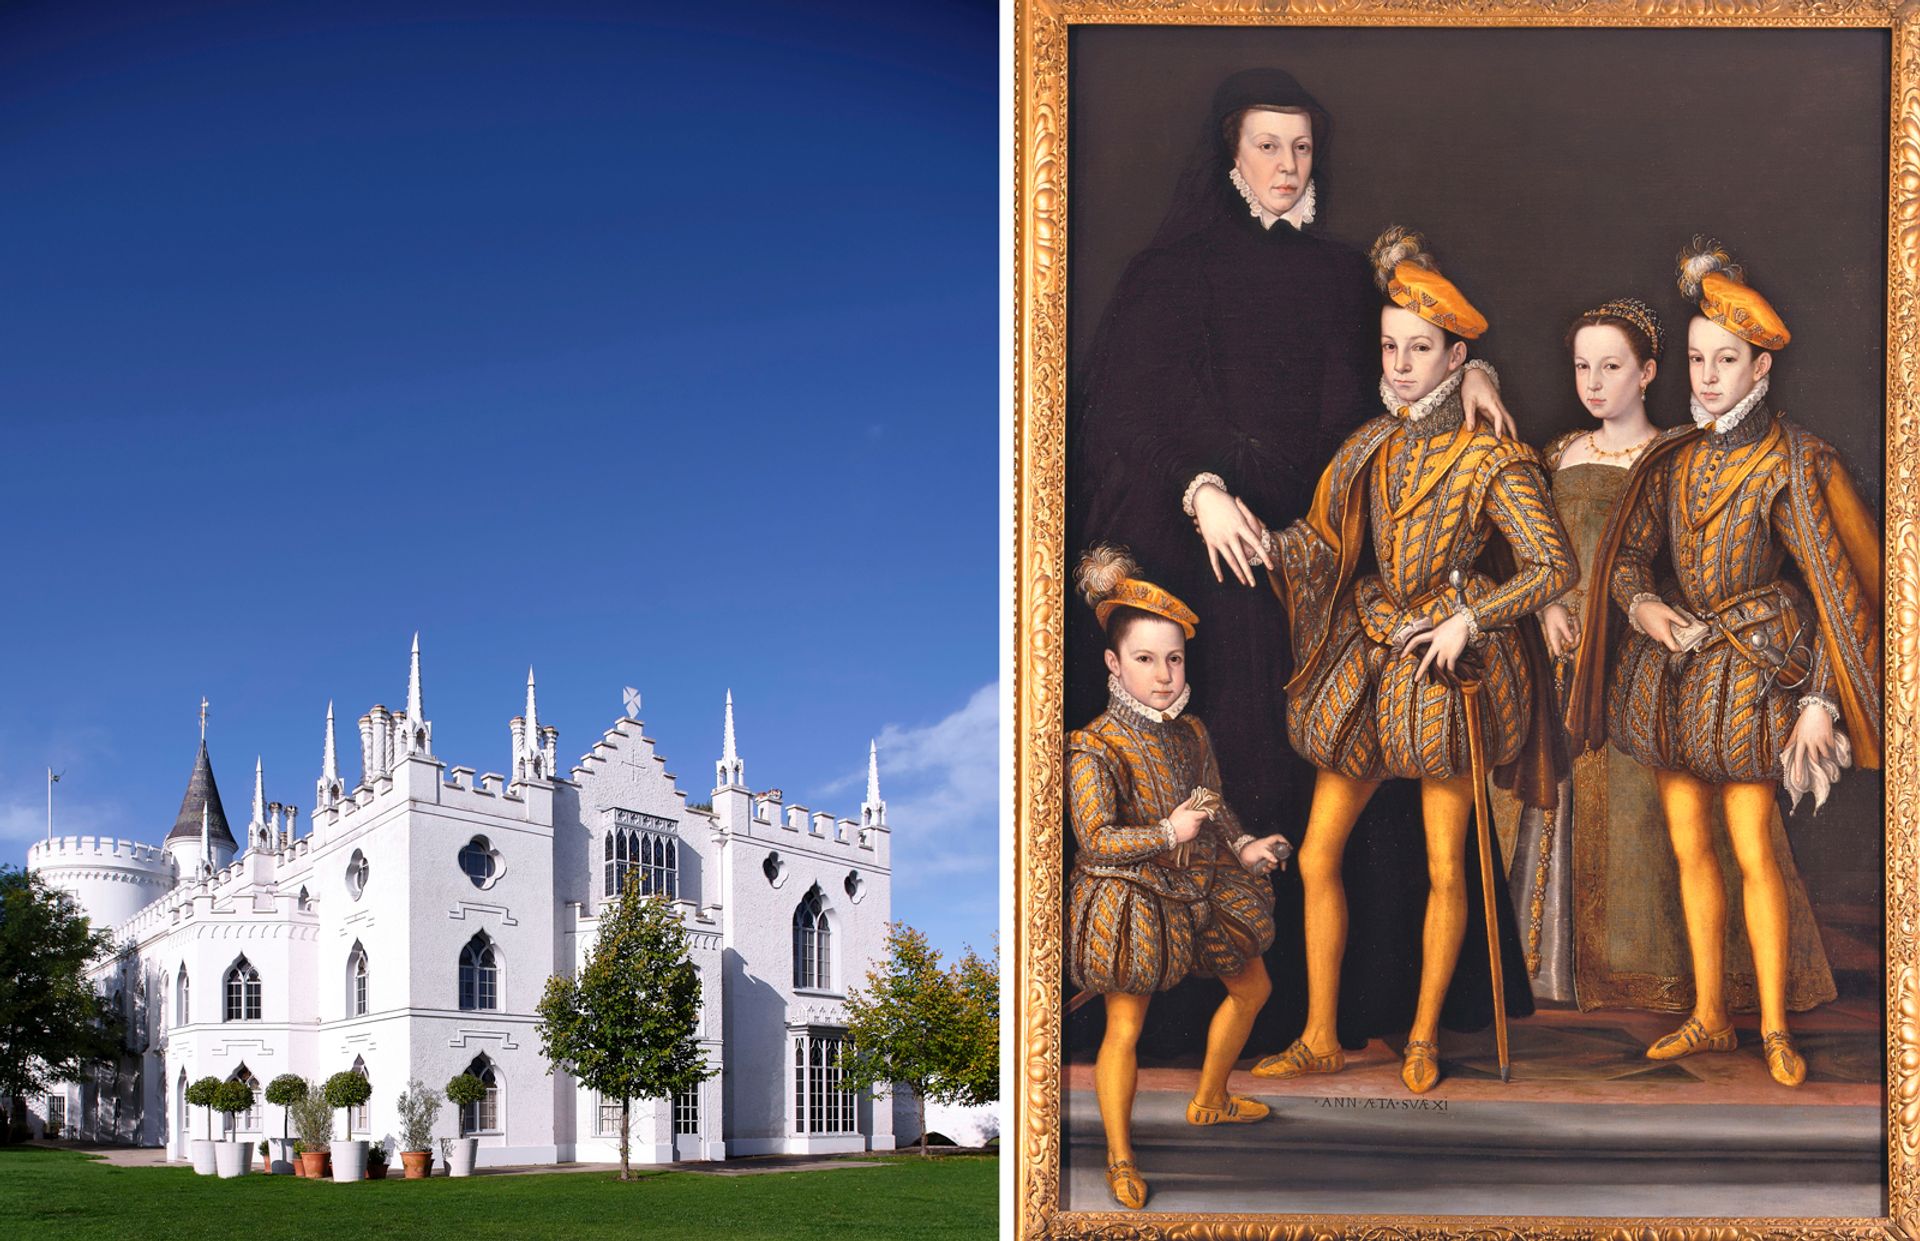 The portrait of Catherine de Medici with her children, made in the workshop of Francois Clouet, has returned to Horace Walpole's Strawberry Hill after being auction almost two centuries ago © Kilian O'Sullivan